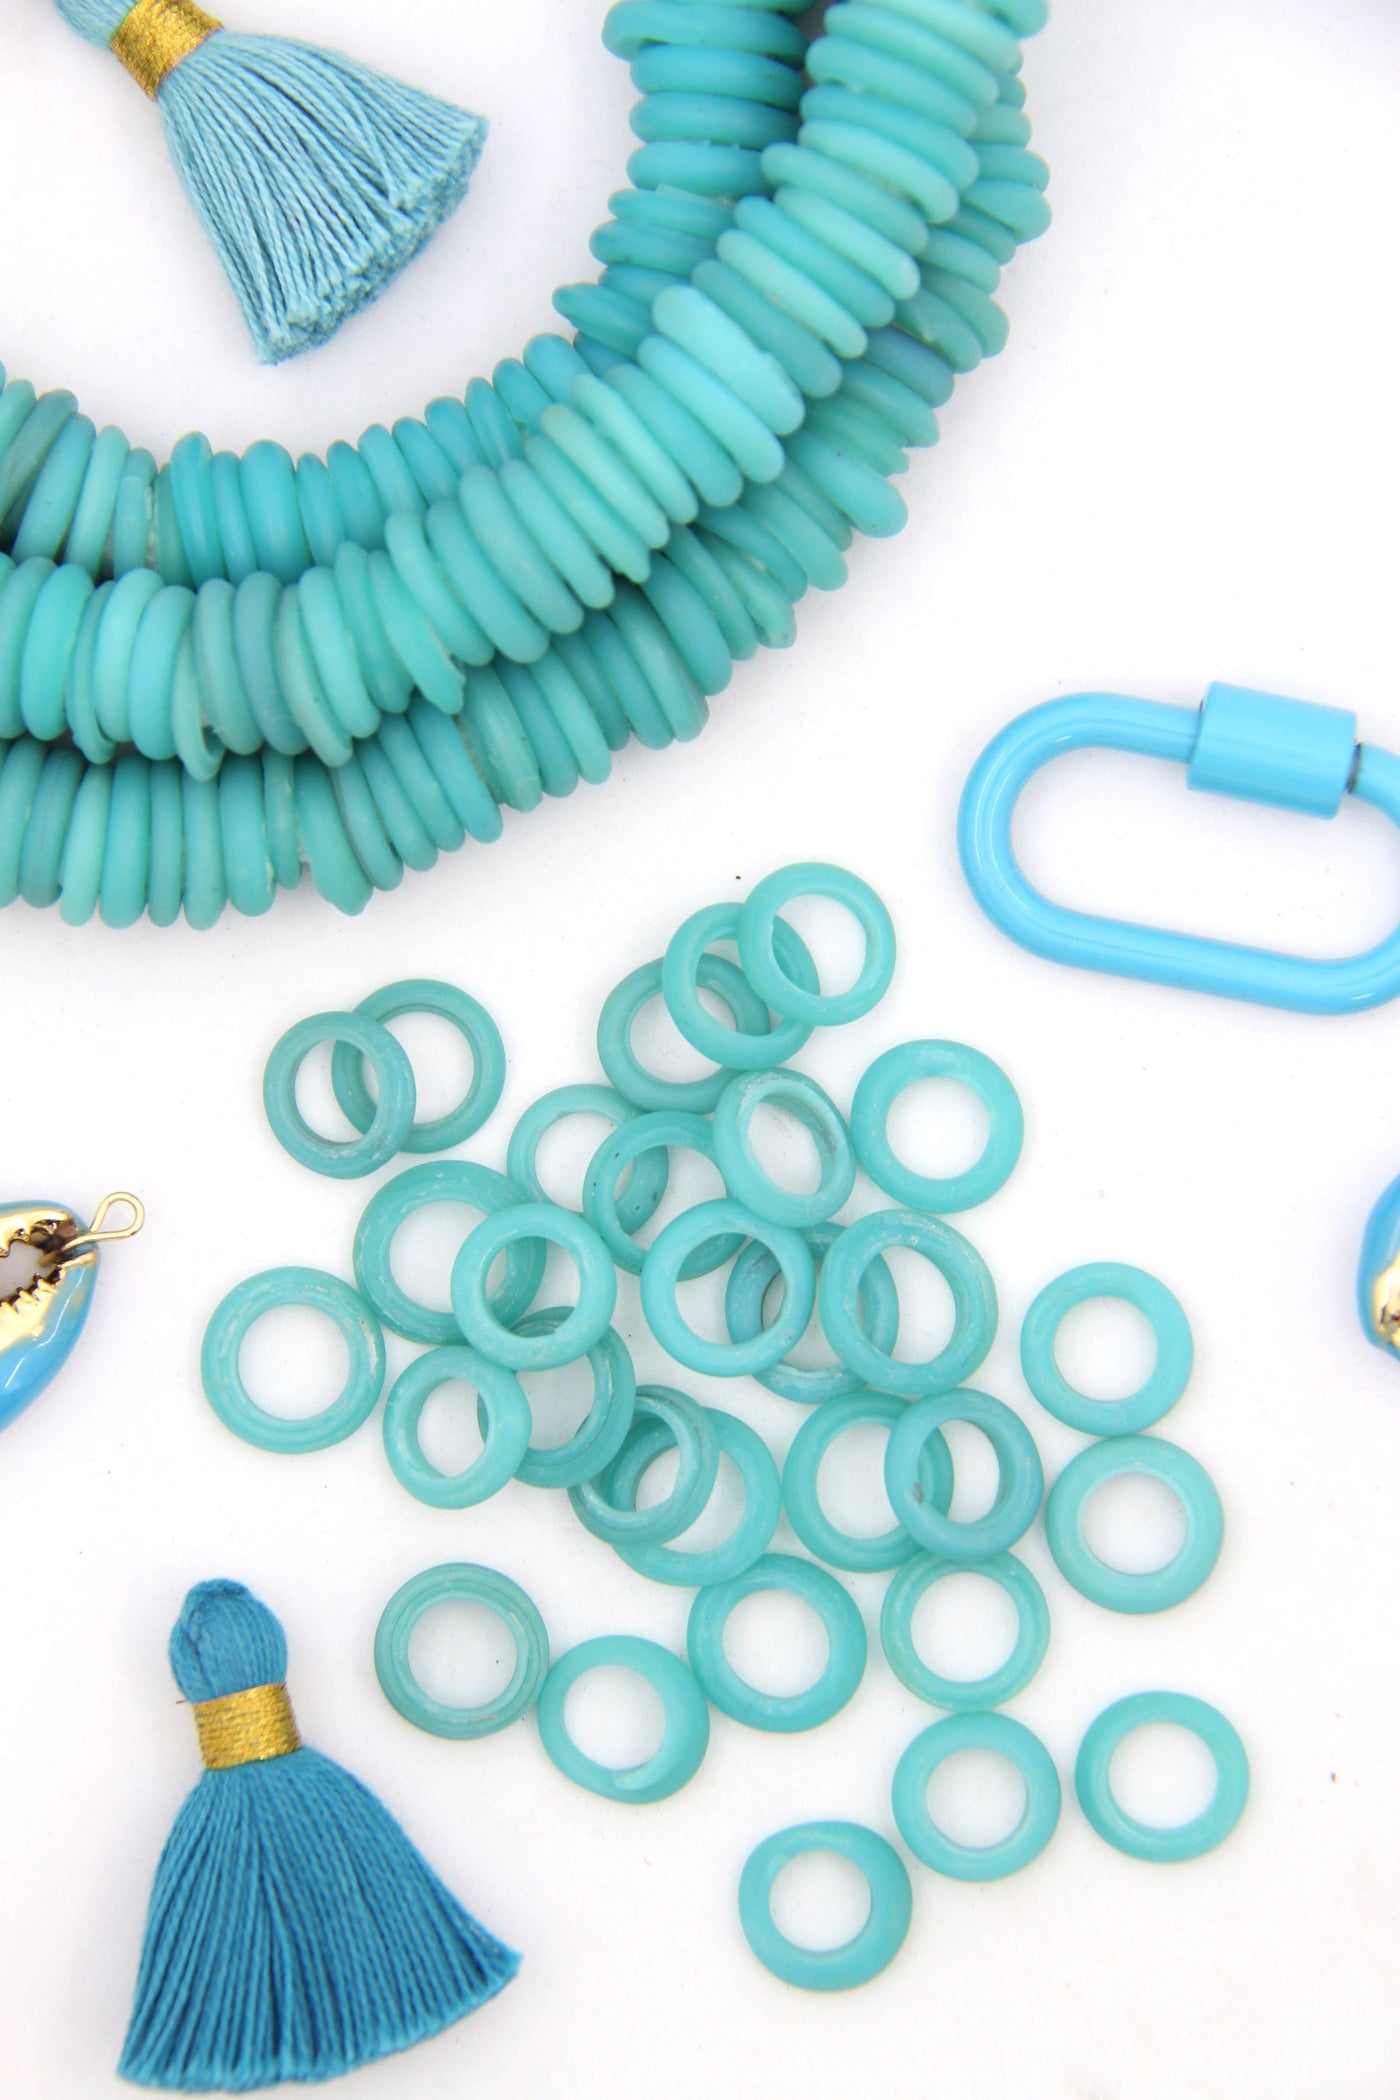 Large Hole Beads for making beachy DIY Jewelry 